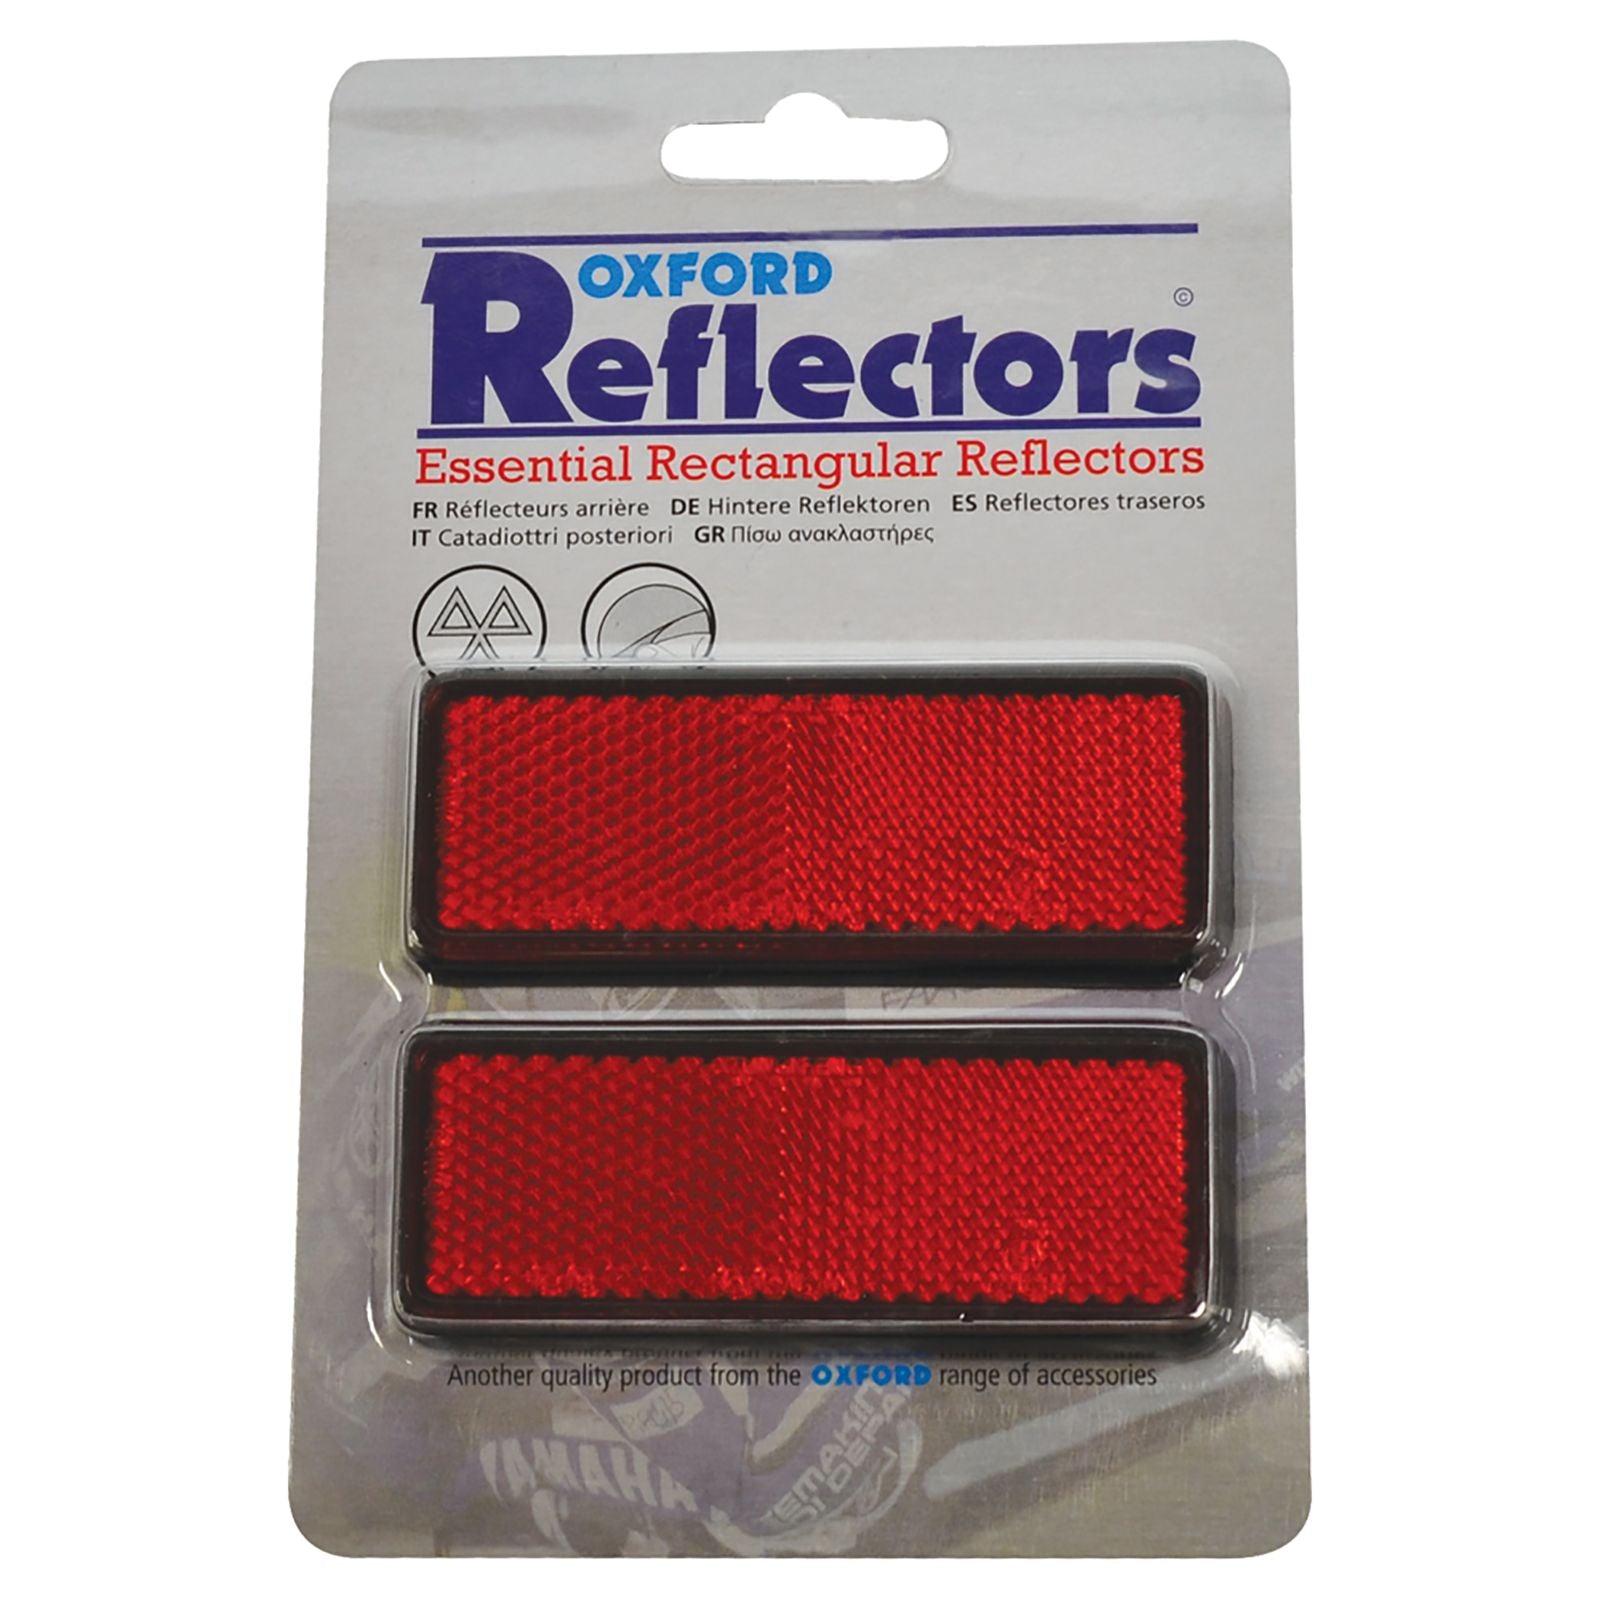 New OXFORD Reflectors Red Rectangular - Pair (Was Oxox110) #OXOX804